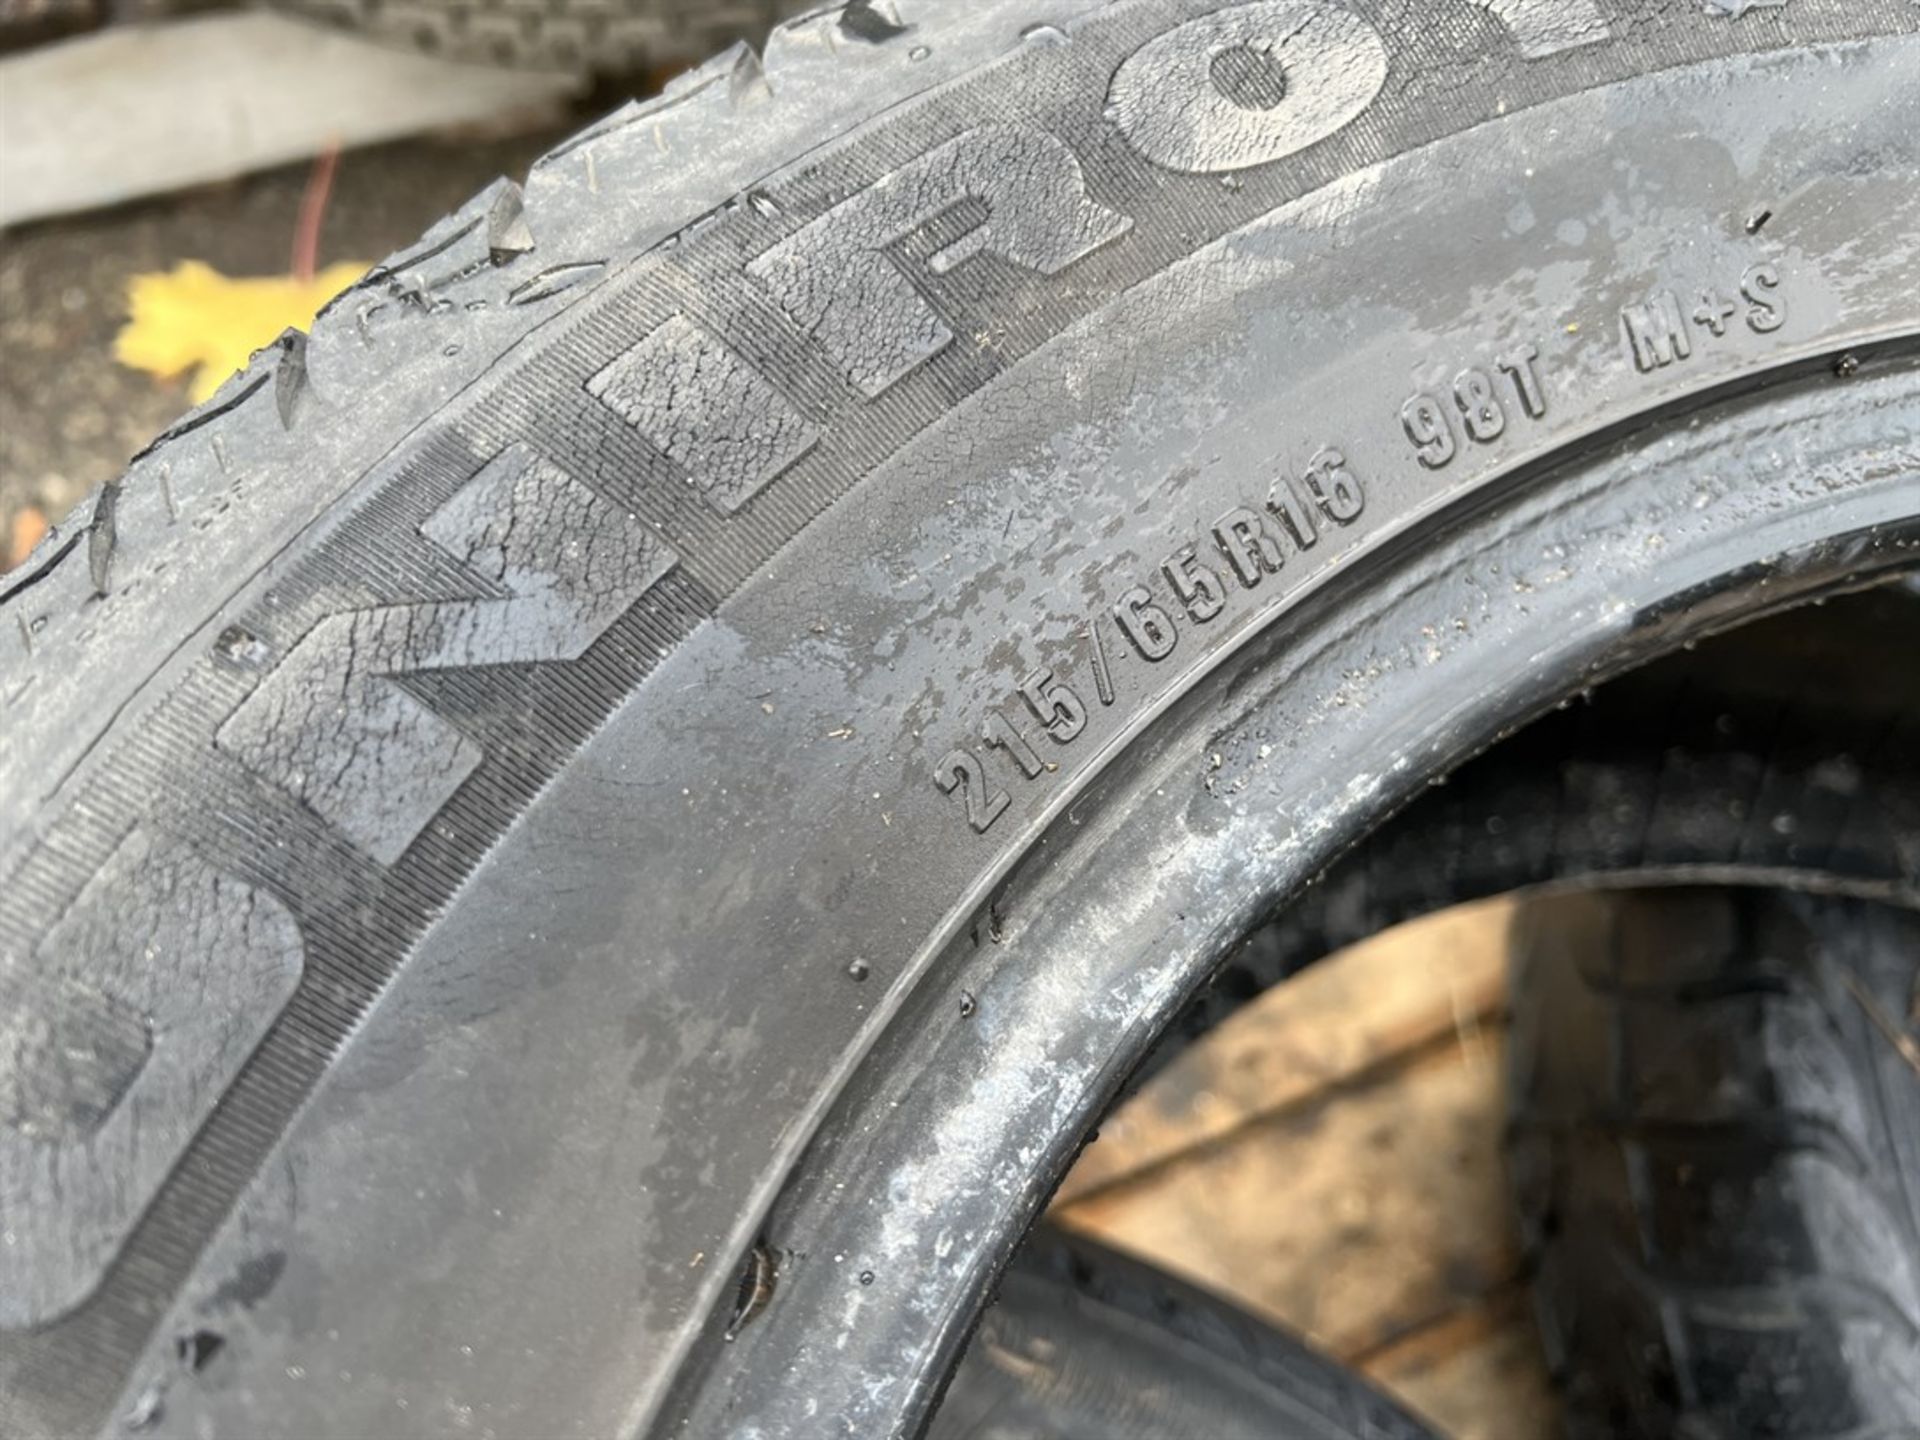 Lot Comprising (3) Tires, (1) 215/65R16 98T, (1) 195/65R15, and (1) 195/70R1491H Tubeless - Image 3 of 6